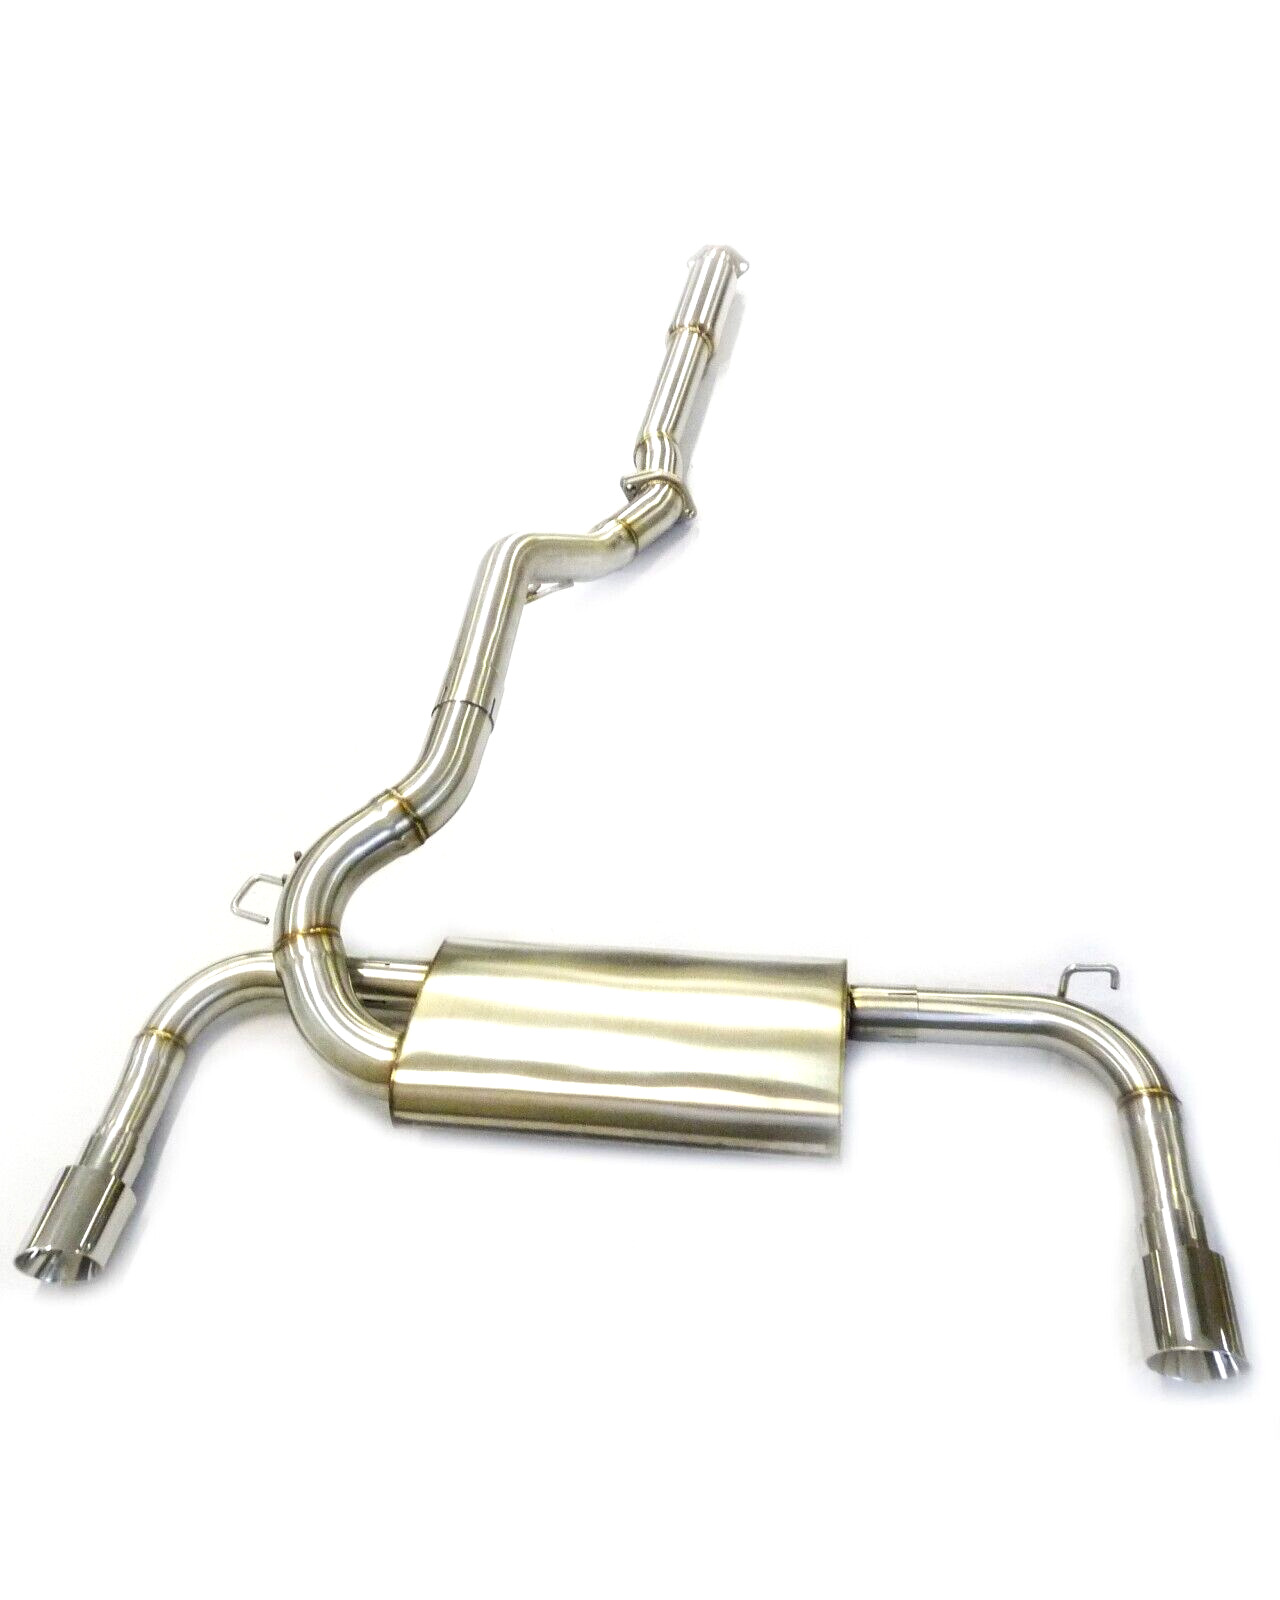 Becker-P Stainless Catback Exhaust Fits For 2004 thru 2011 Volvo S40 T5 2.5L